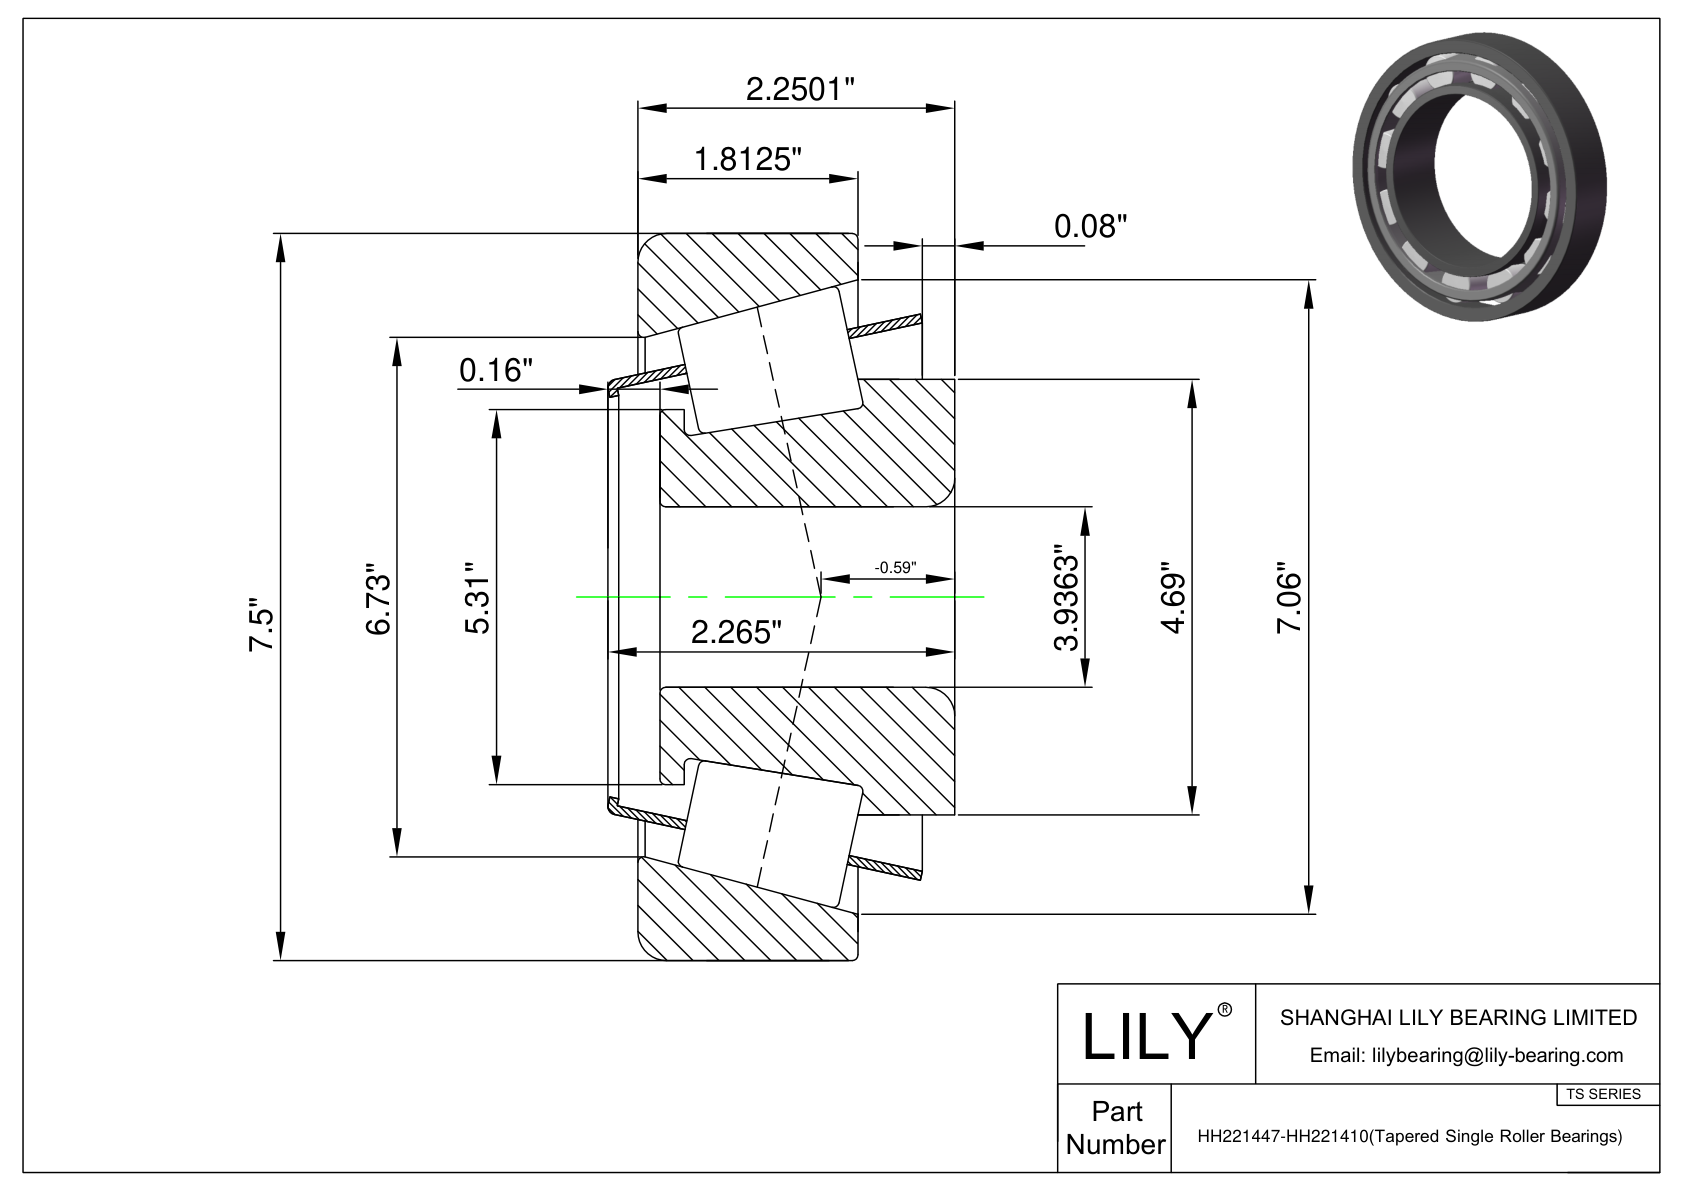 HH221447-HH221410 TS (Tapered Single Roller Bearings) (Imperial) cad drawing